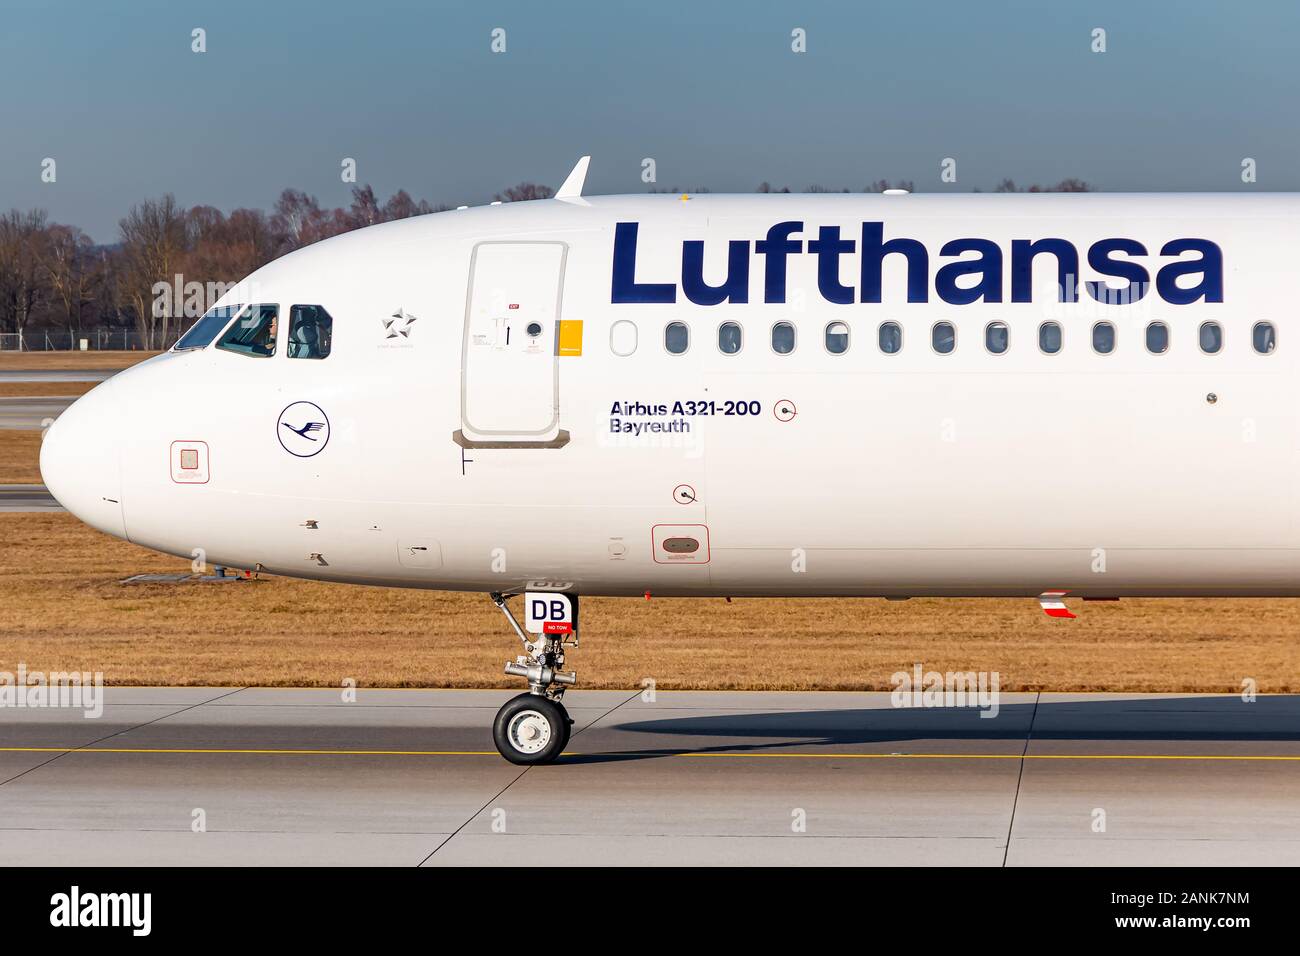 Munich, Germany - January 16, 2020: Lufthansa Airbus A321 airplane at Munich airport (MUC) in Germany. Airbus is an aircraft manufacturer from Toulous Stock Photo